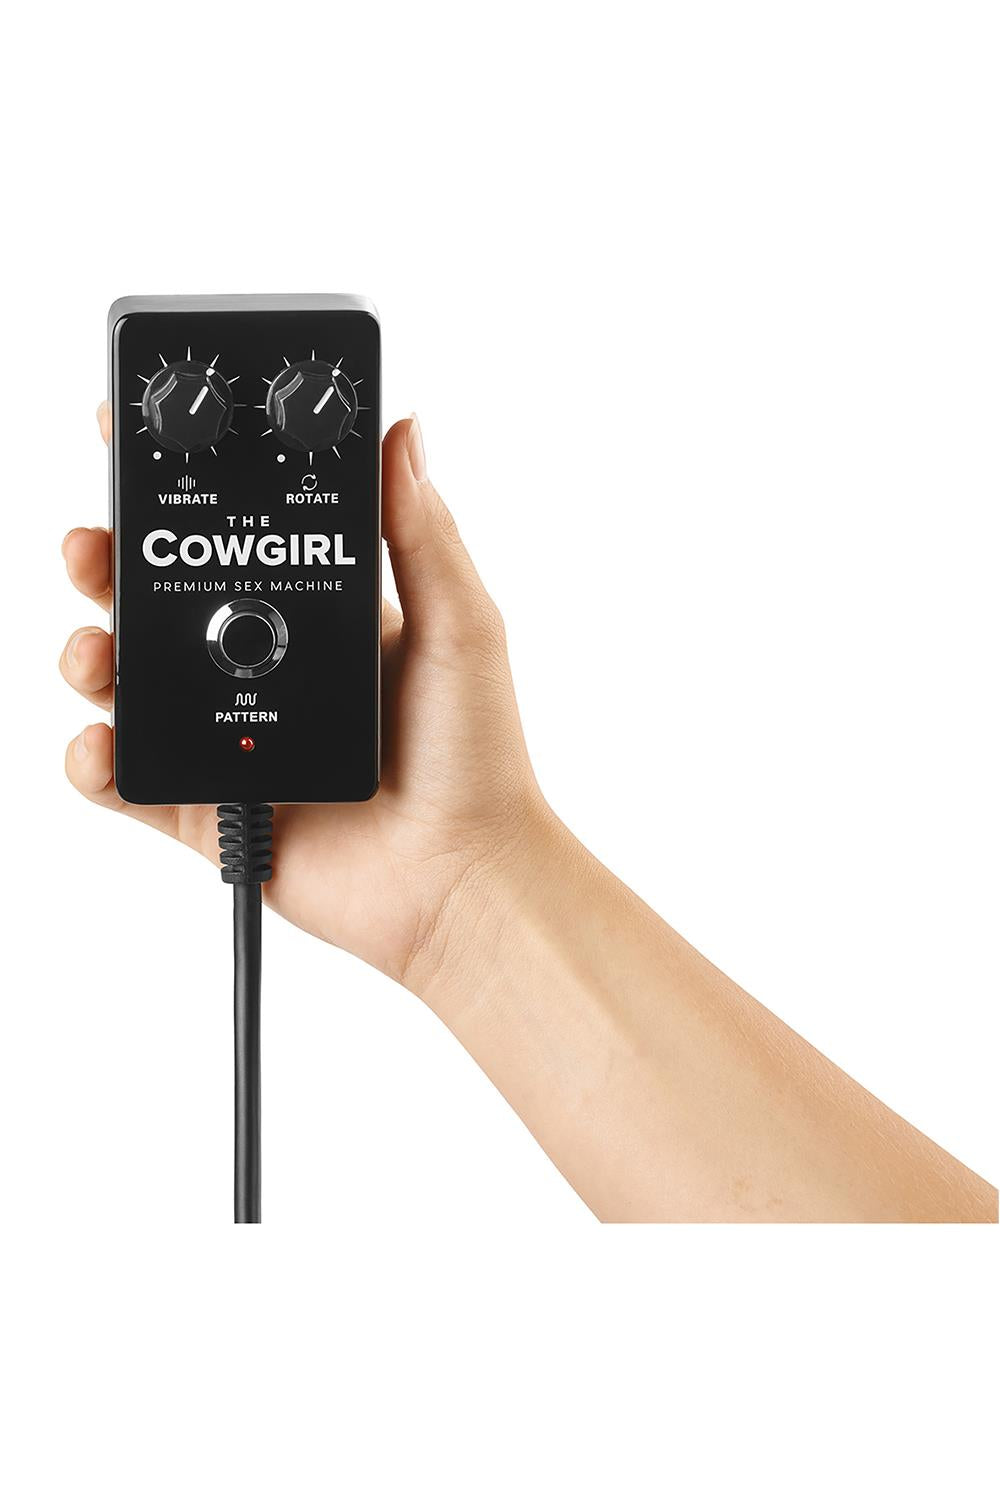 Cowgirl Premium Silicone Sex Machine with Remote for vibration and rotation control